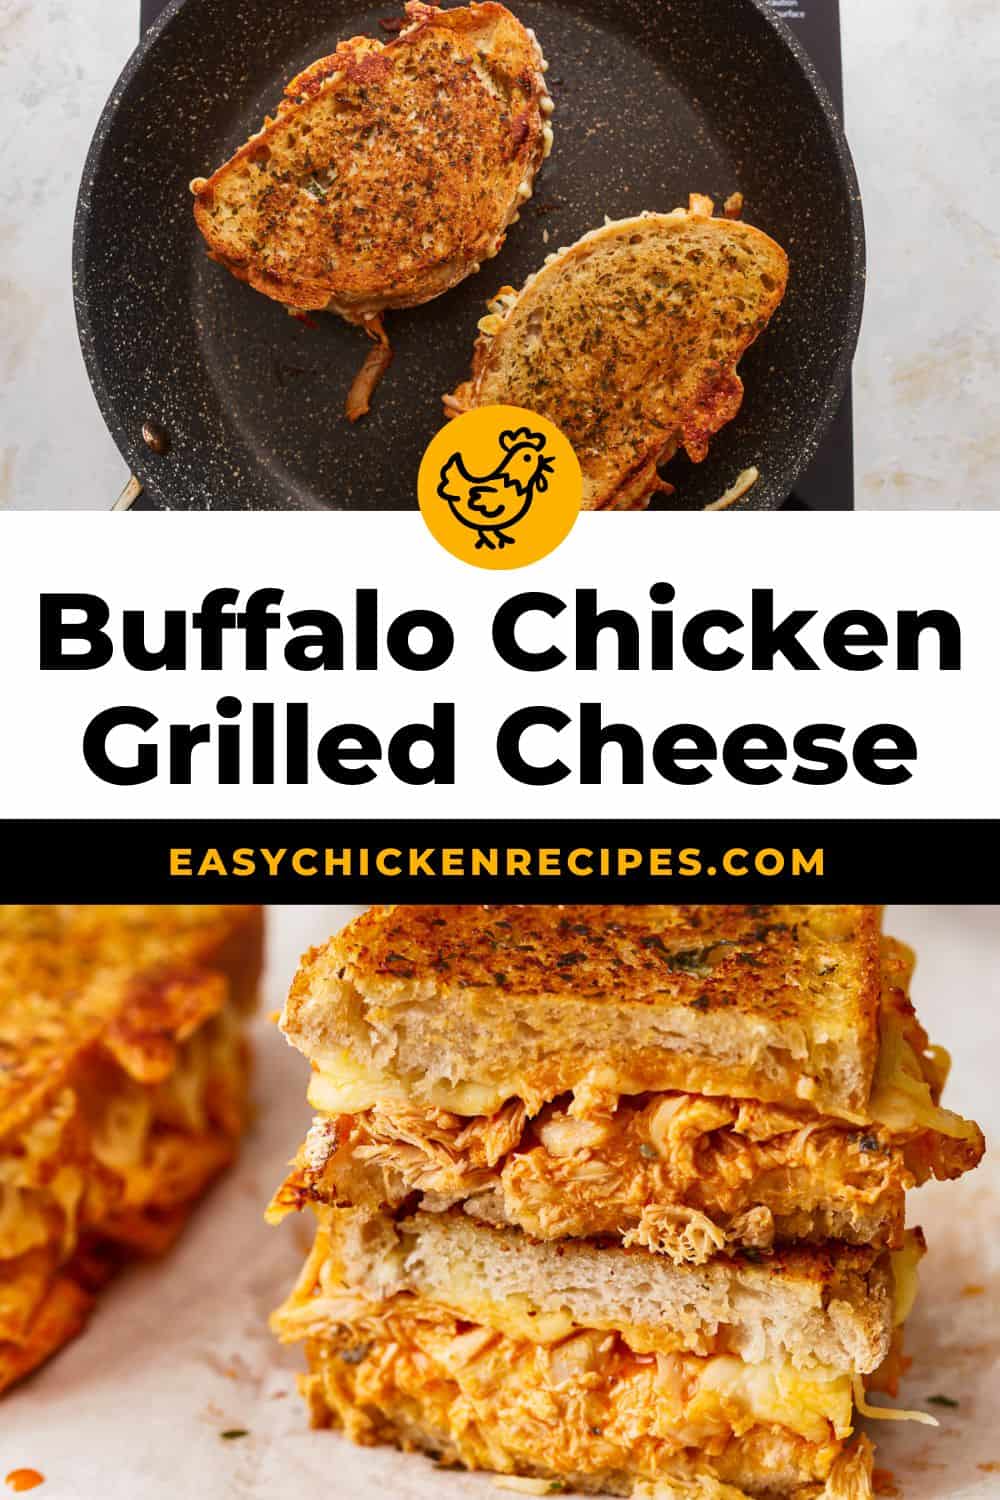 Buffalo Chicken Grilled Cheese Recipe - Easy Chicken Recipes